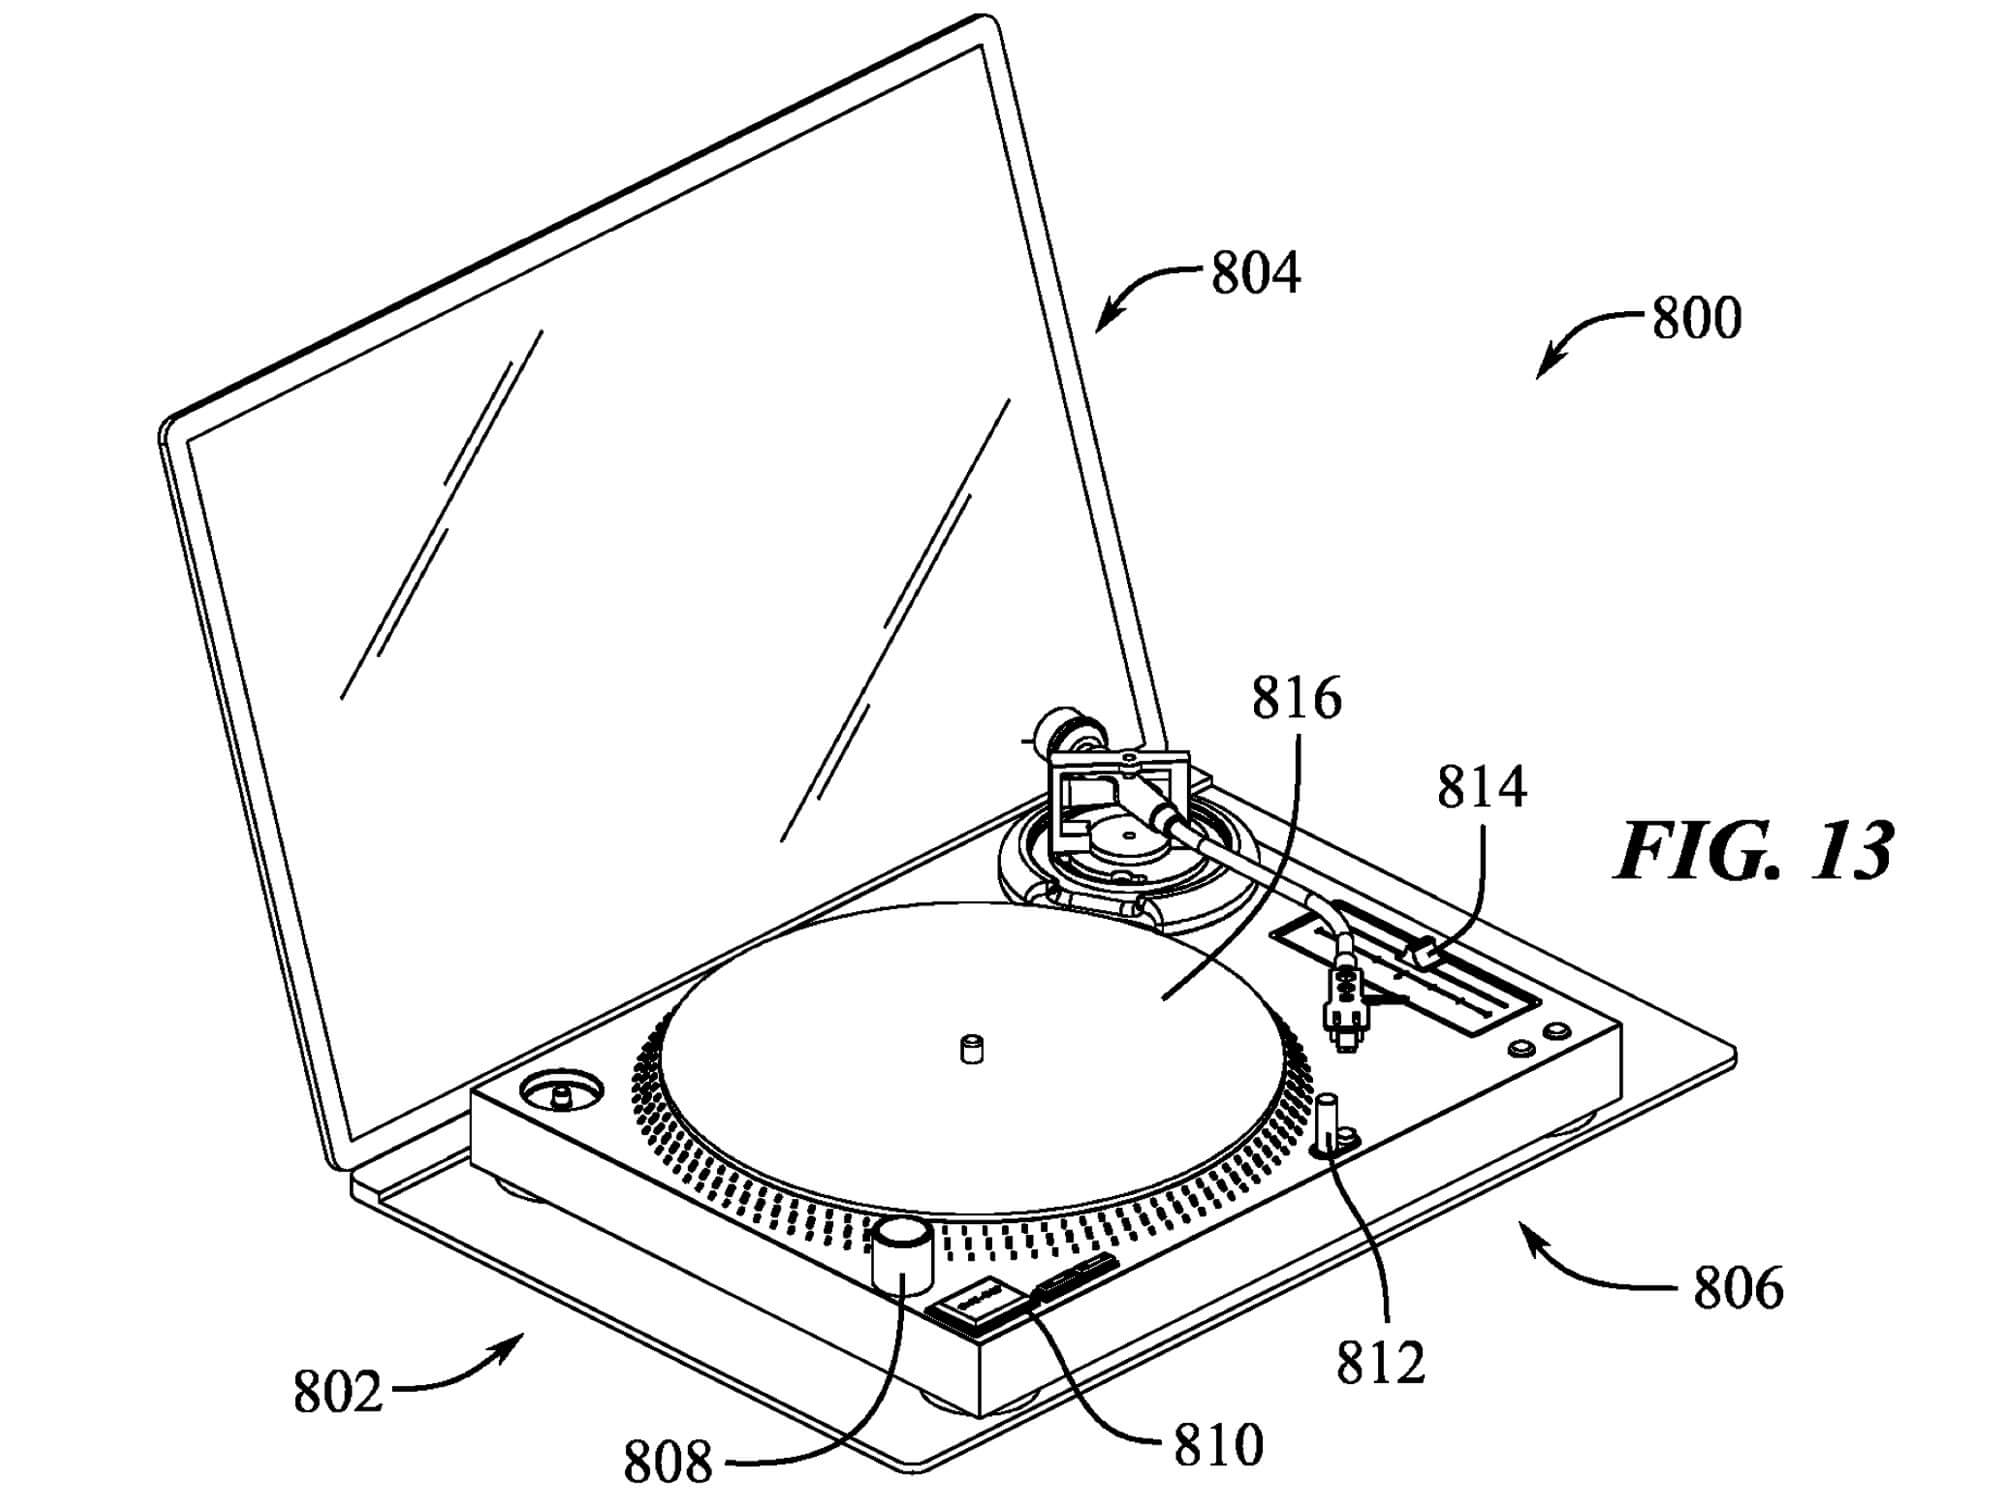 A drawing which outlines a MacBook-like device with a turntable attached at the base